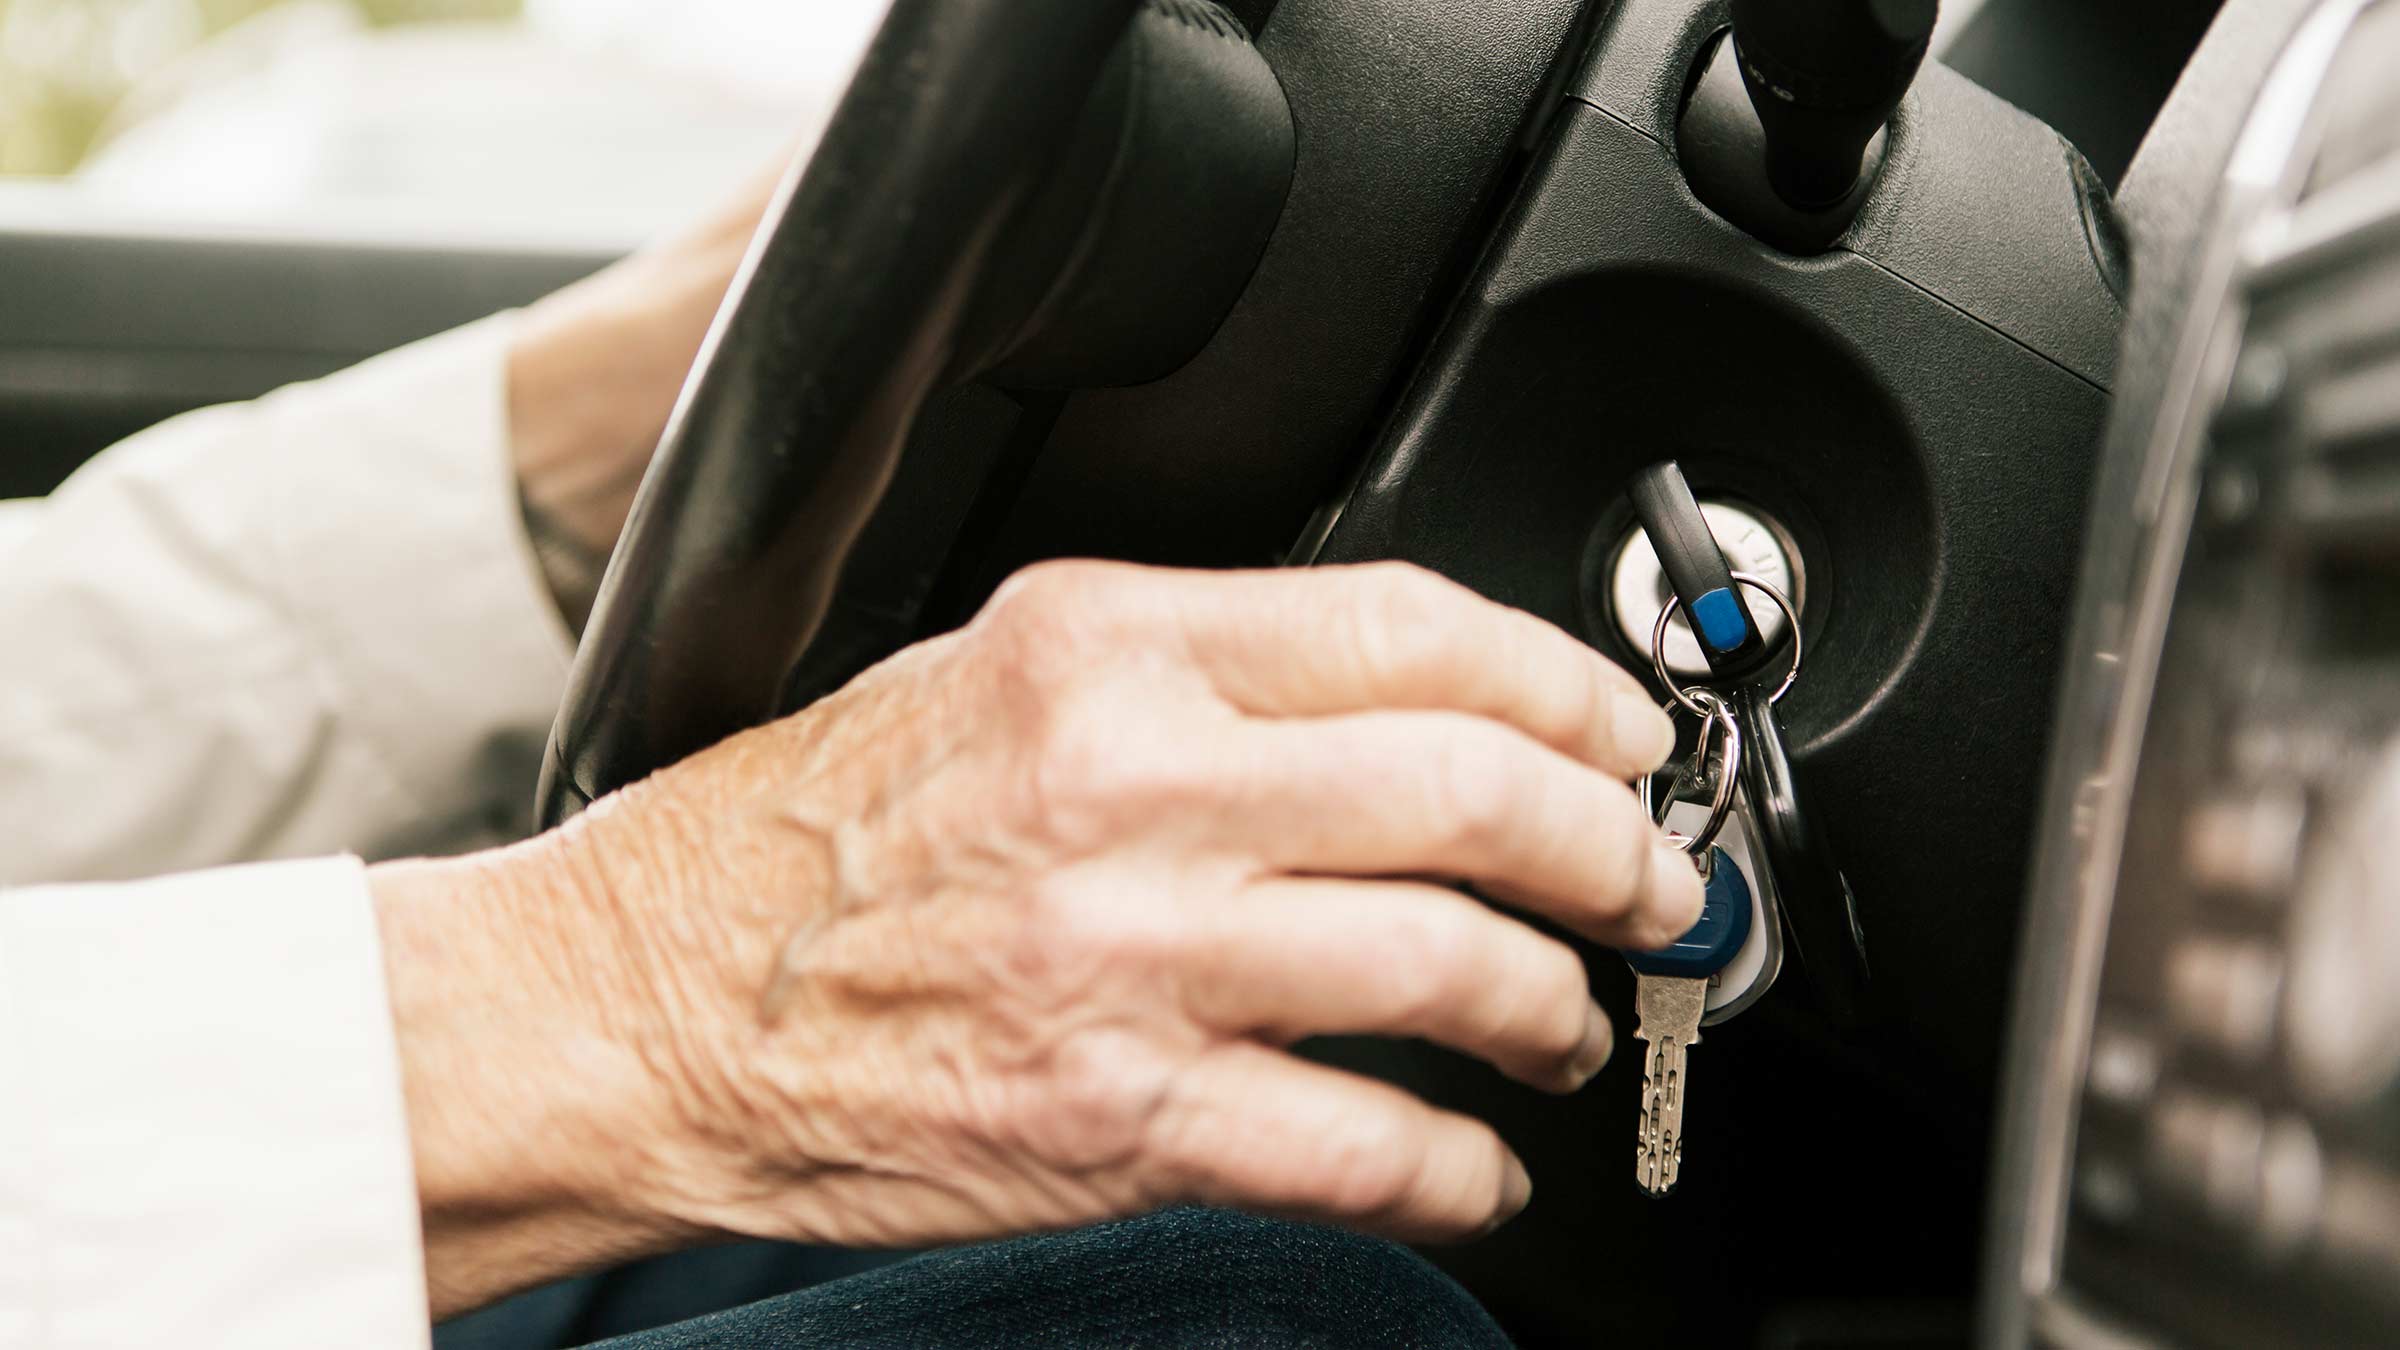 Close up image of senior woman putting car key in ignition